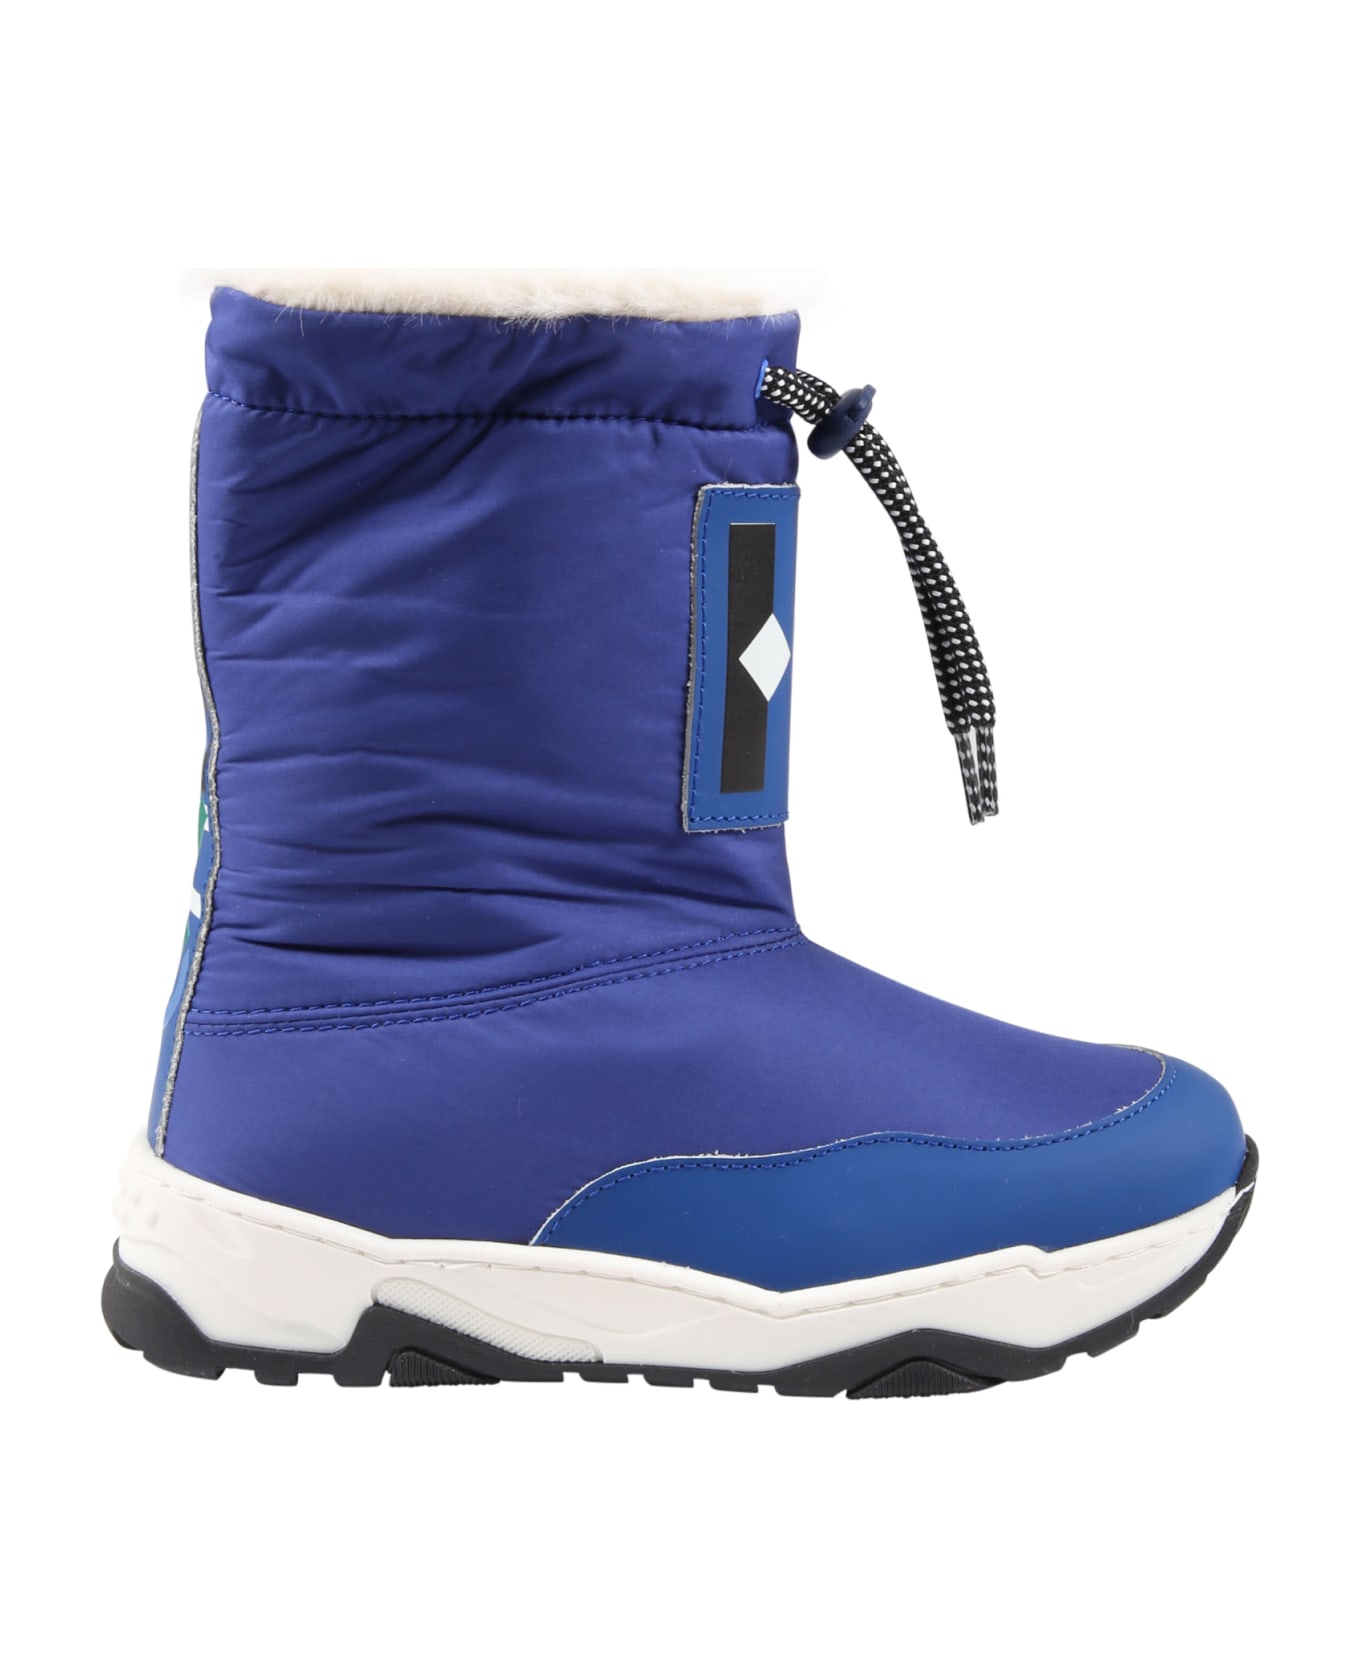 Kenzo Kids Blue Boots For Boy With Logo - Blue シューズ